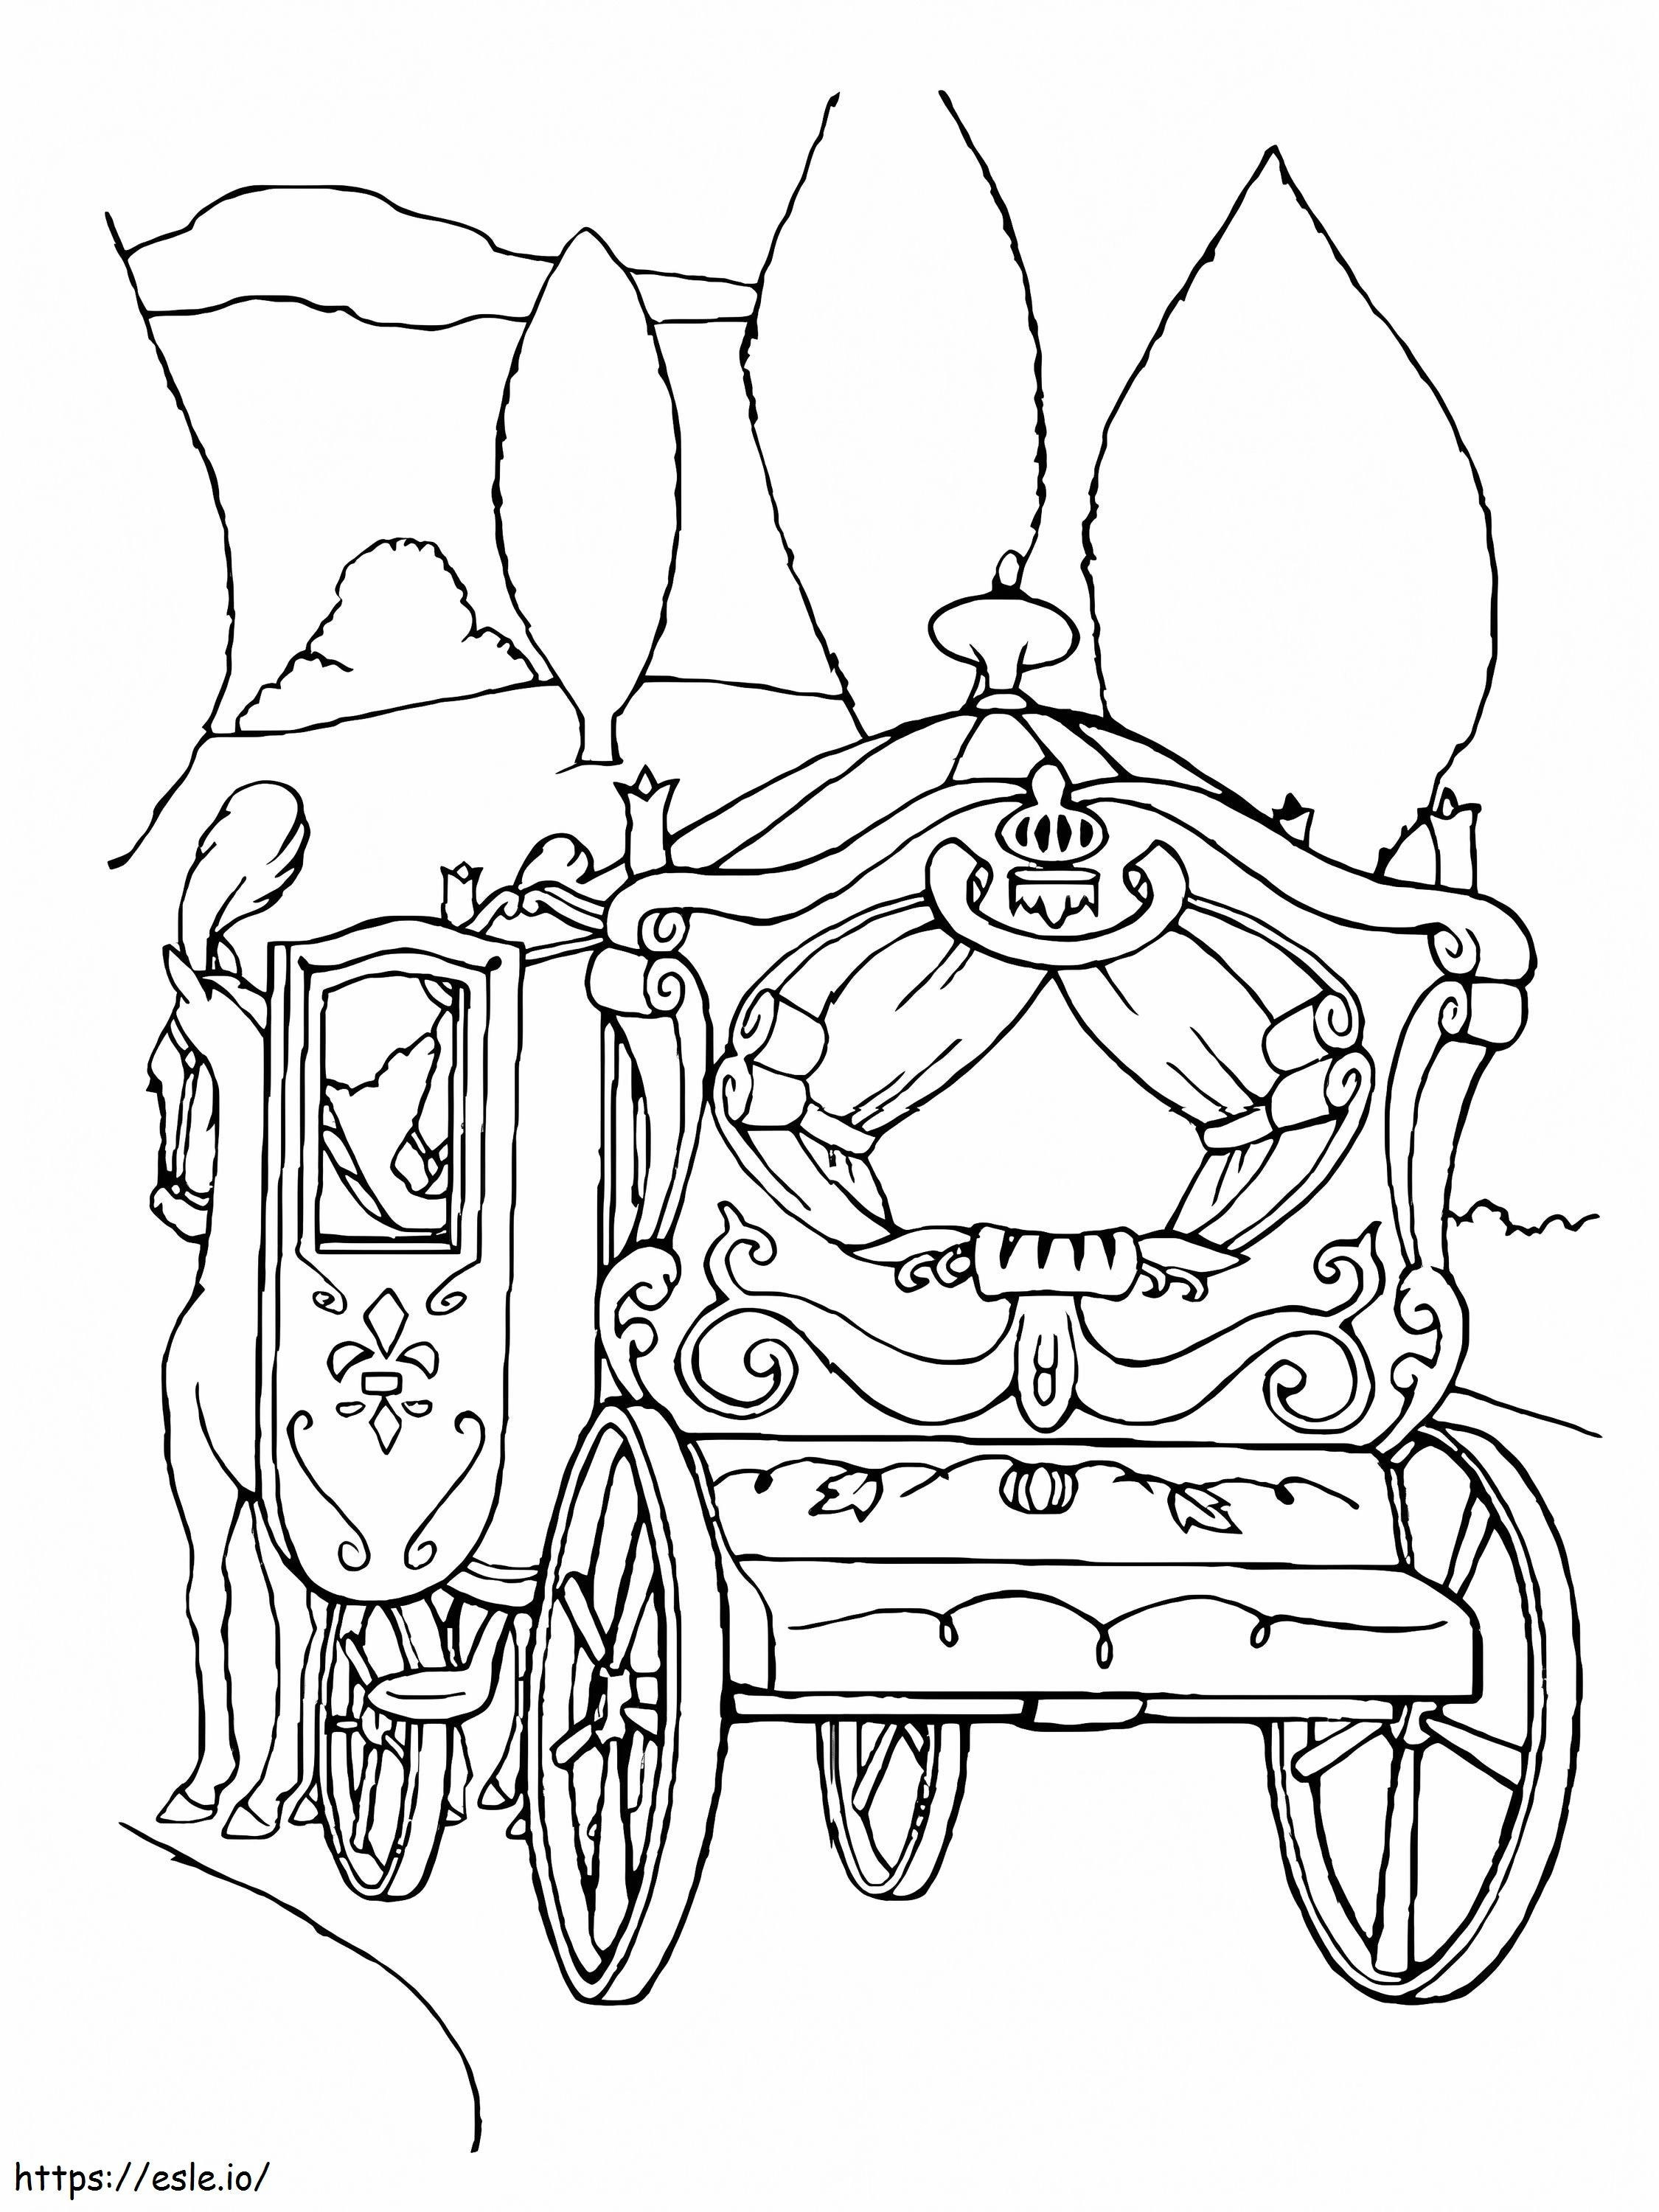 Fairy Tale Carriage coloring page